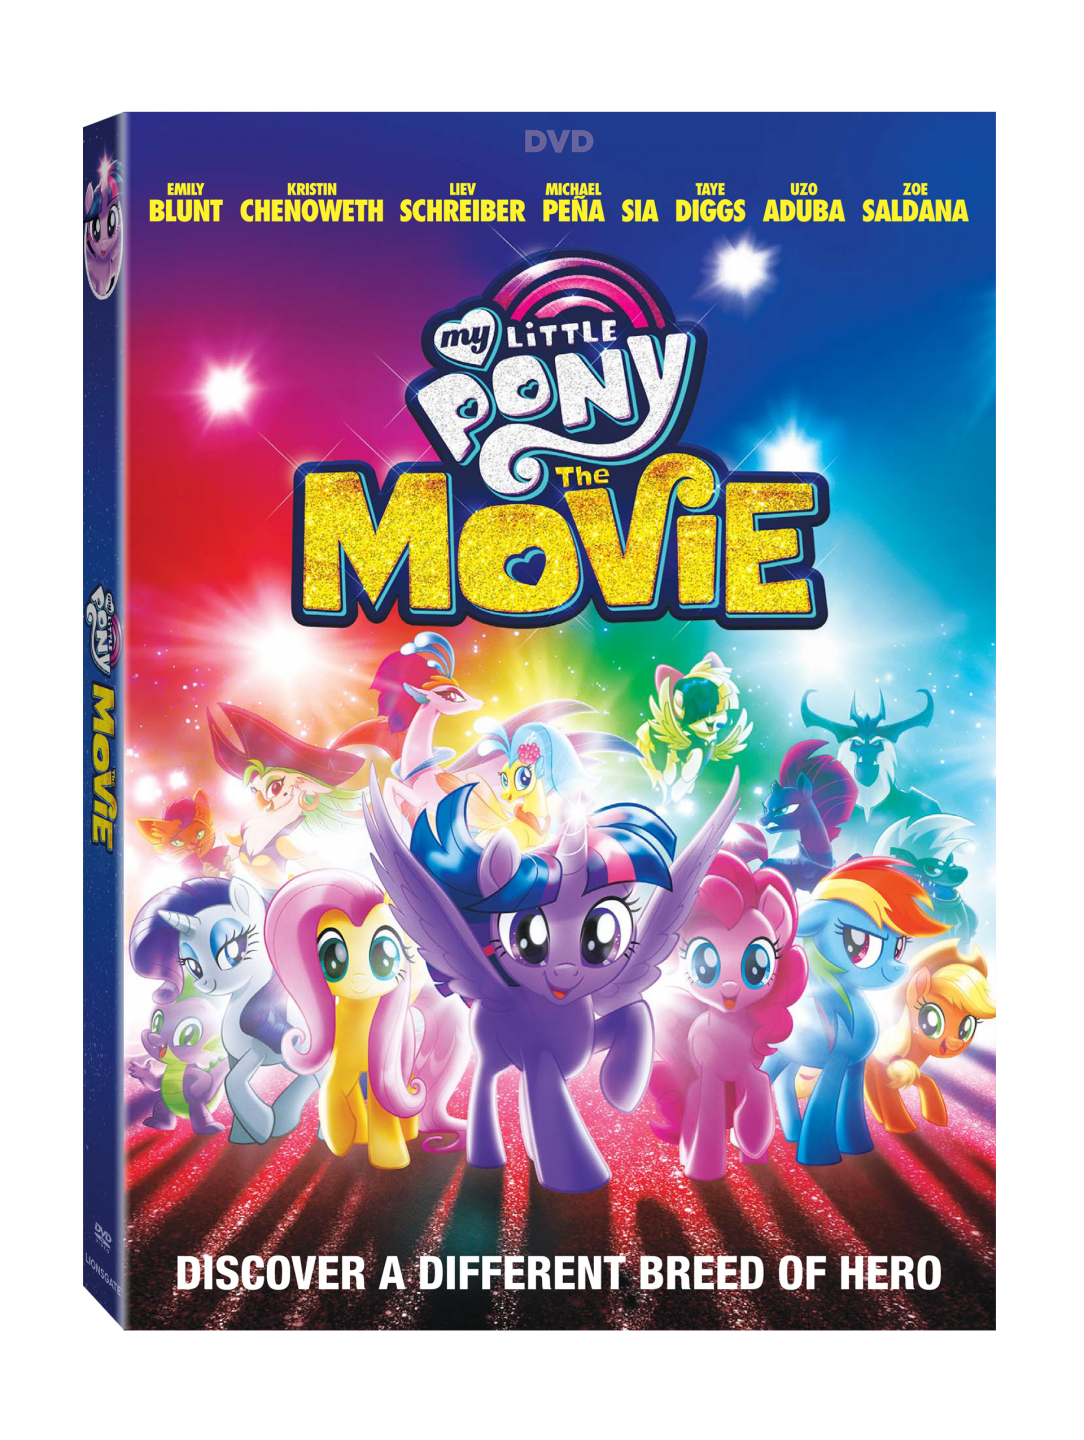 My Little Pony: The Movie DVD Cover (Lionsgate Home Entertainment)